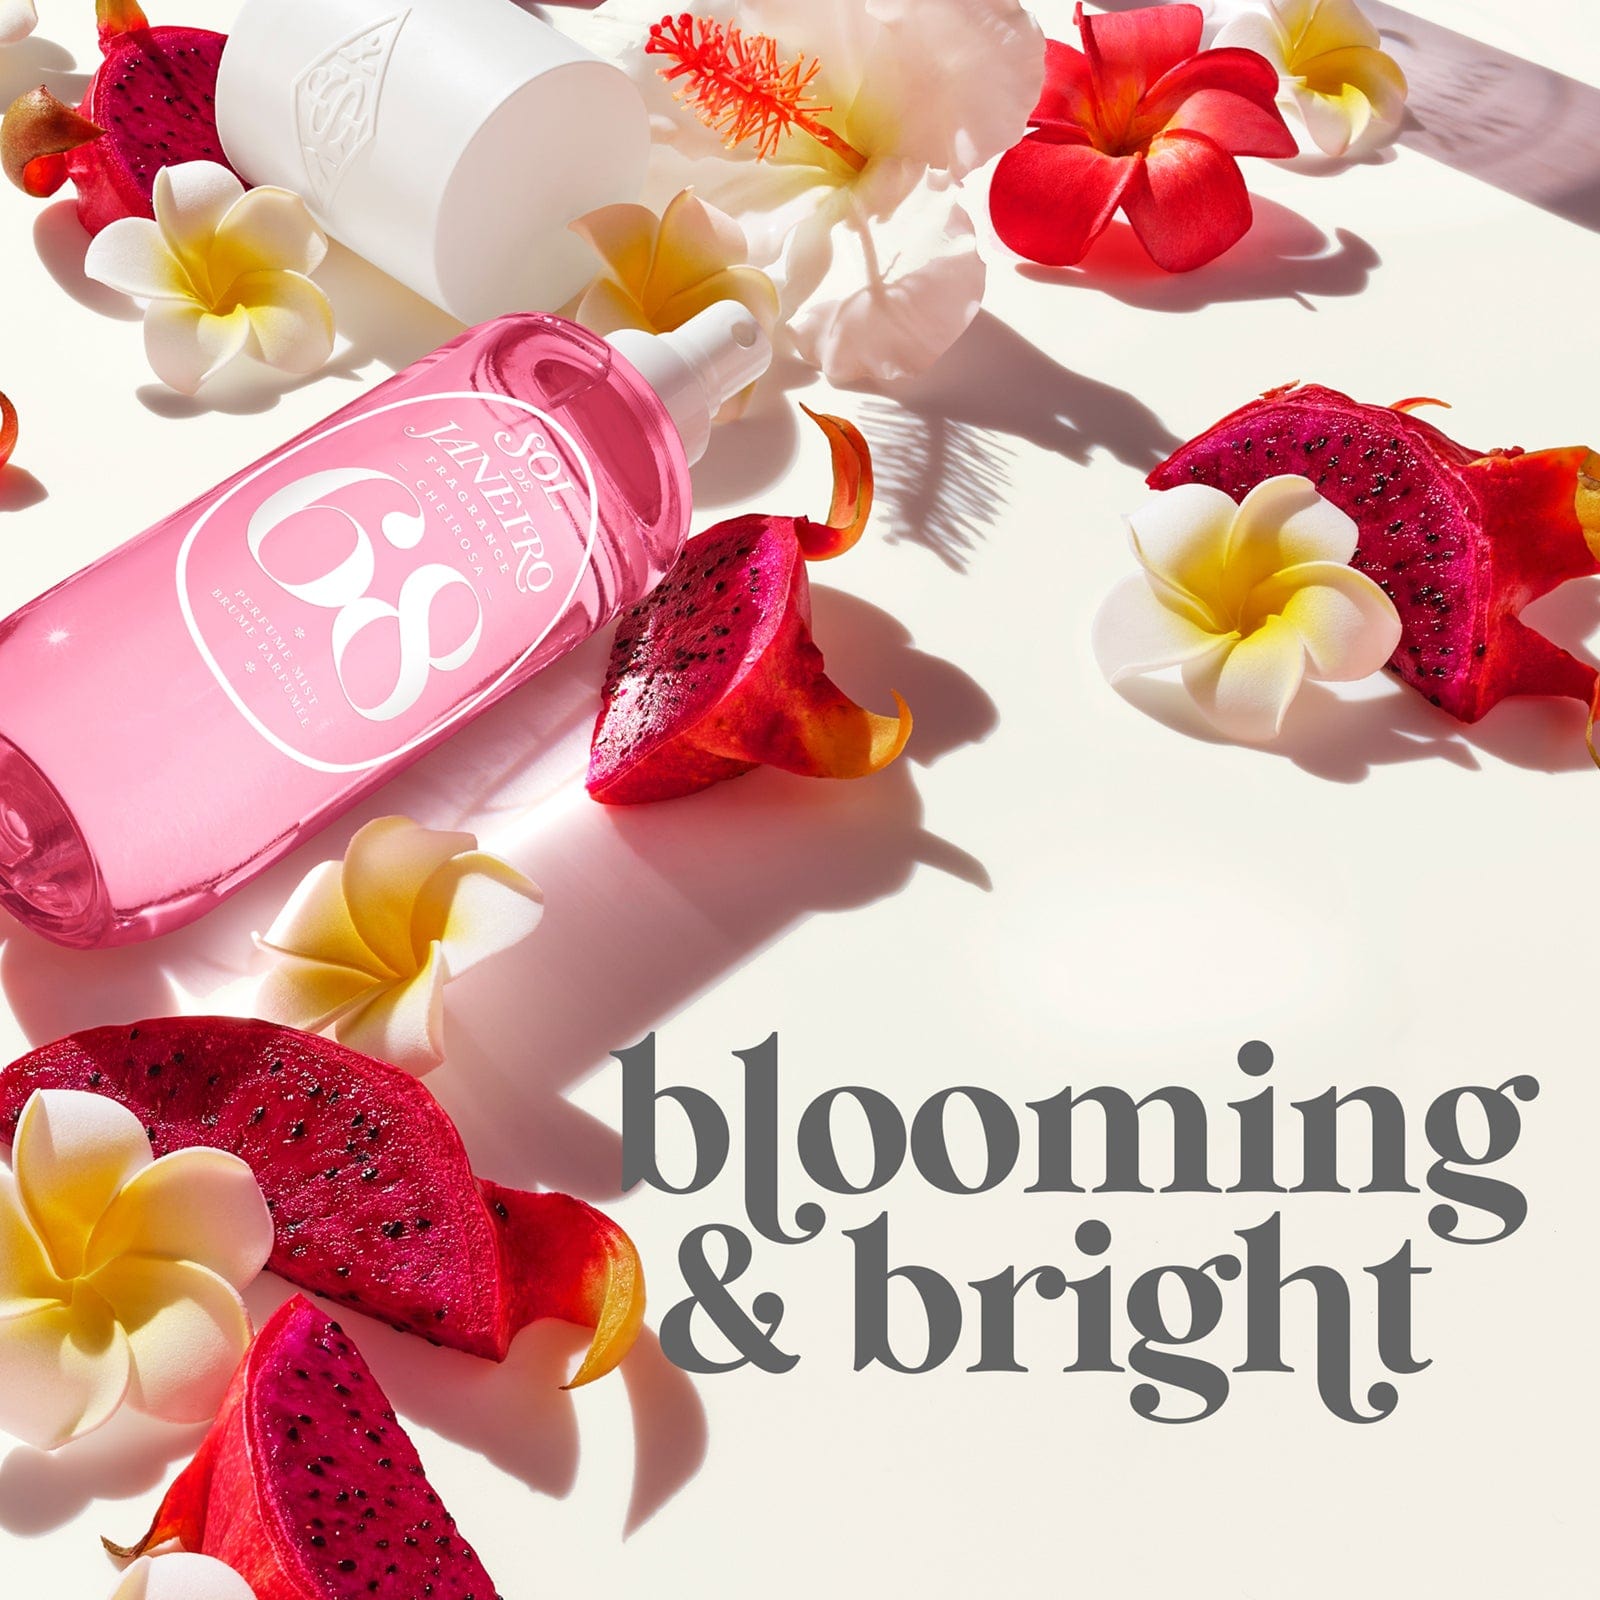 Blooming &amp; bright